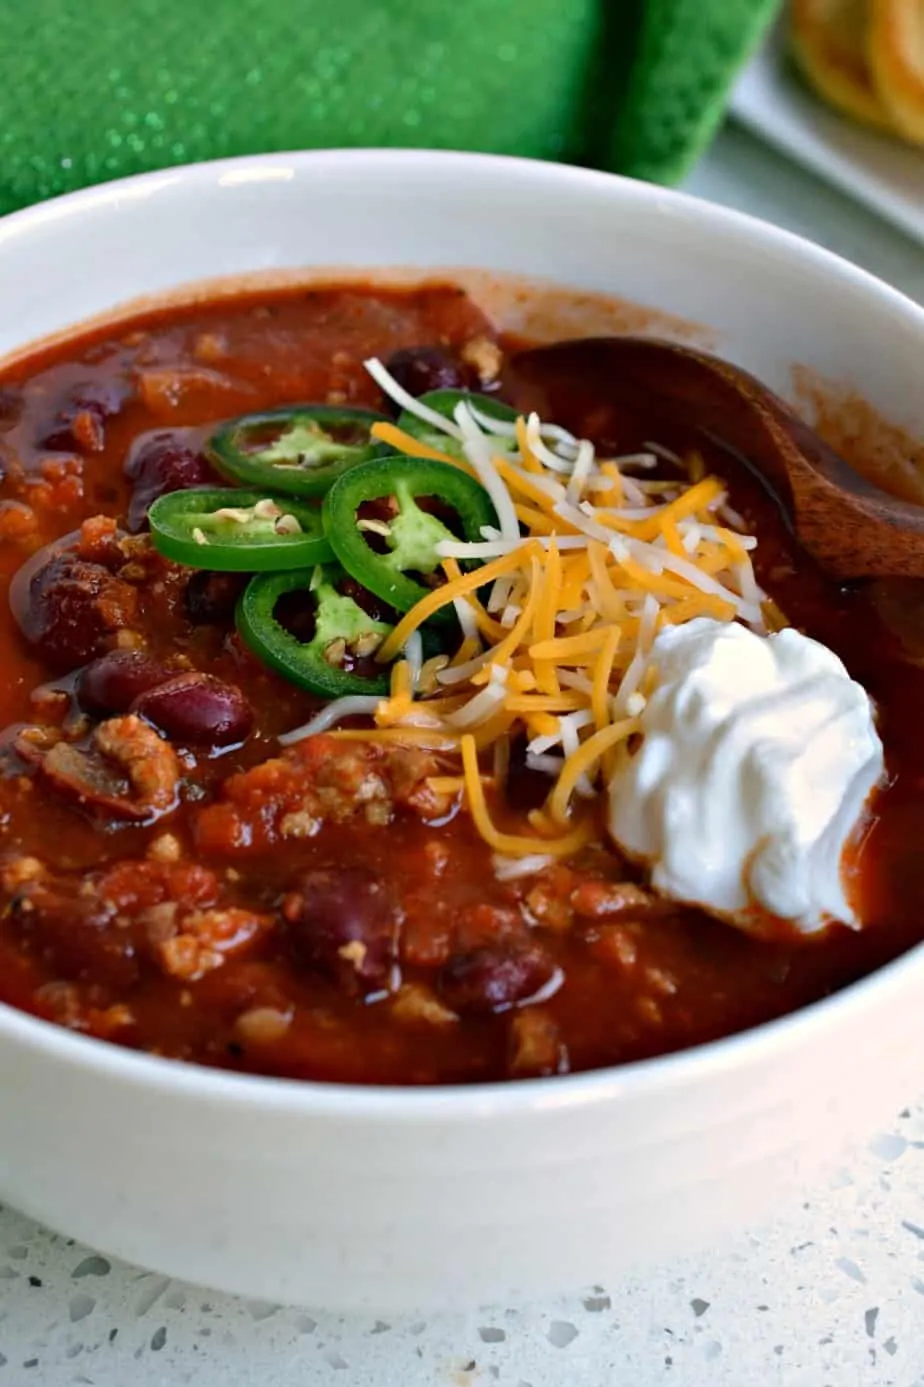 Make a big hot pot of Turkey Chili today and get ready to hear the accolades.